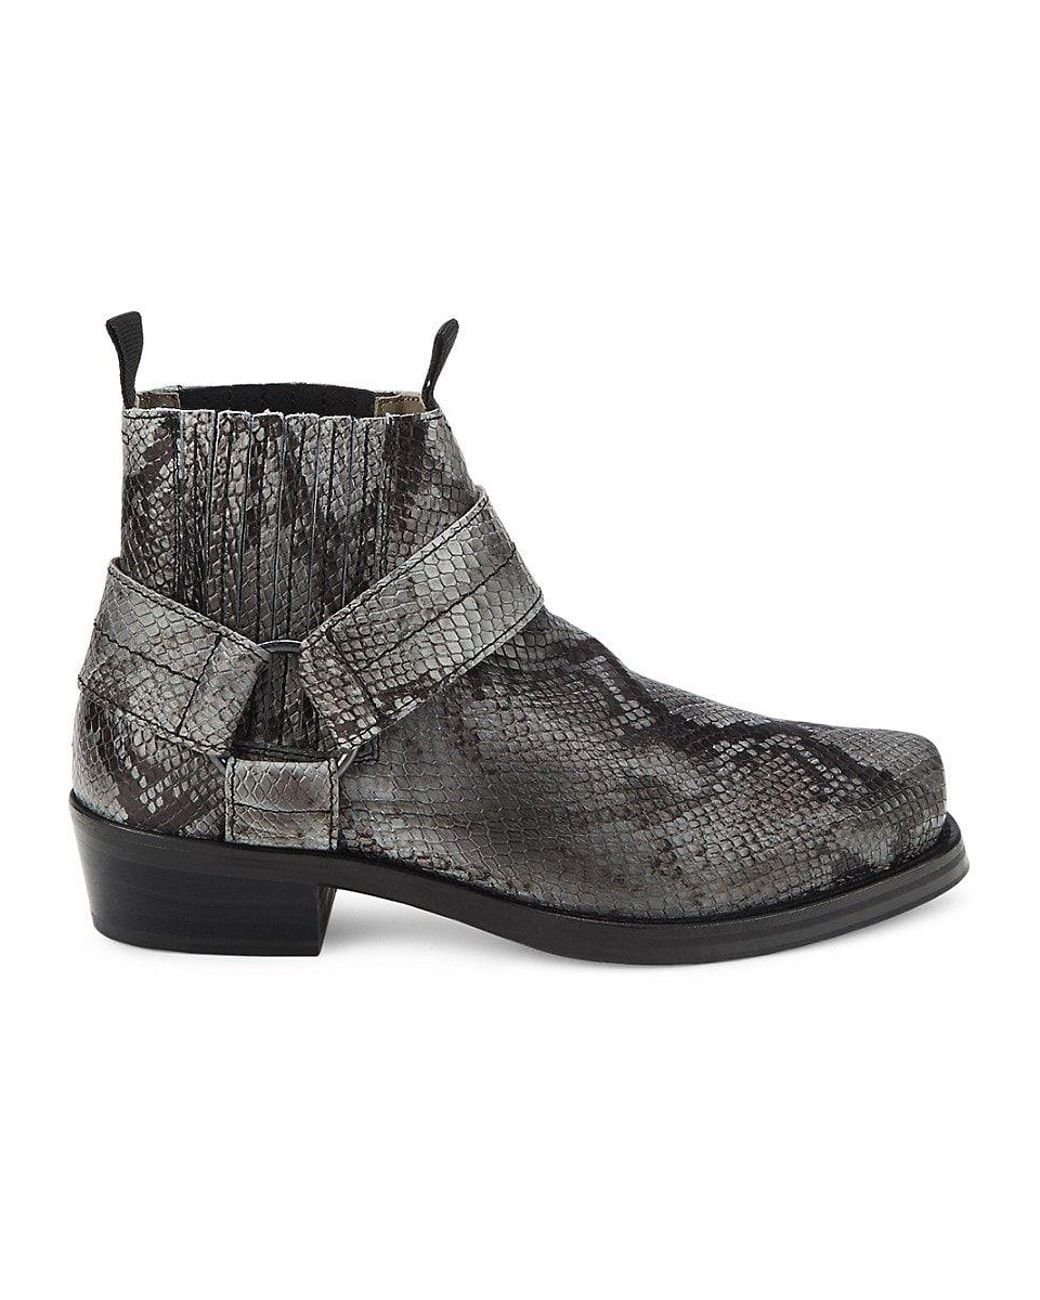 AllSaints Abbot Snakeskin Print Leather Ankle Boots in Black Lyst